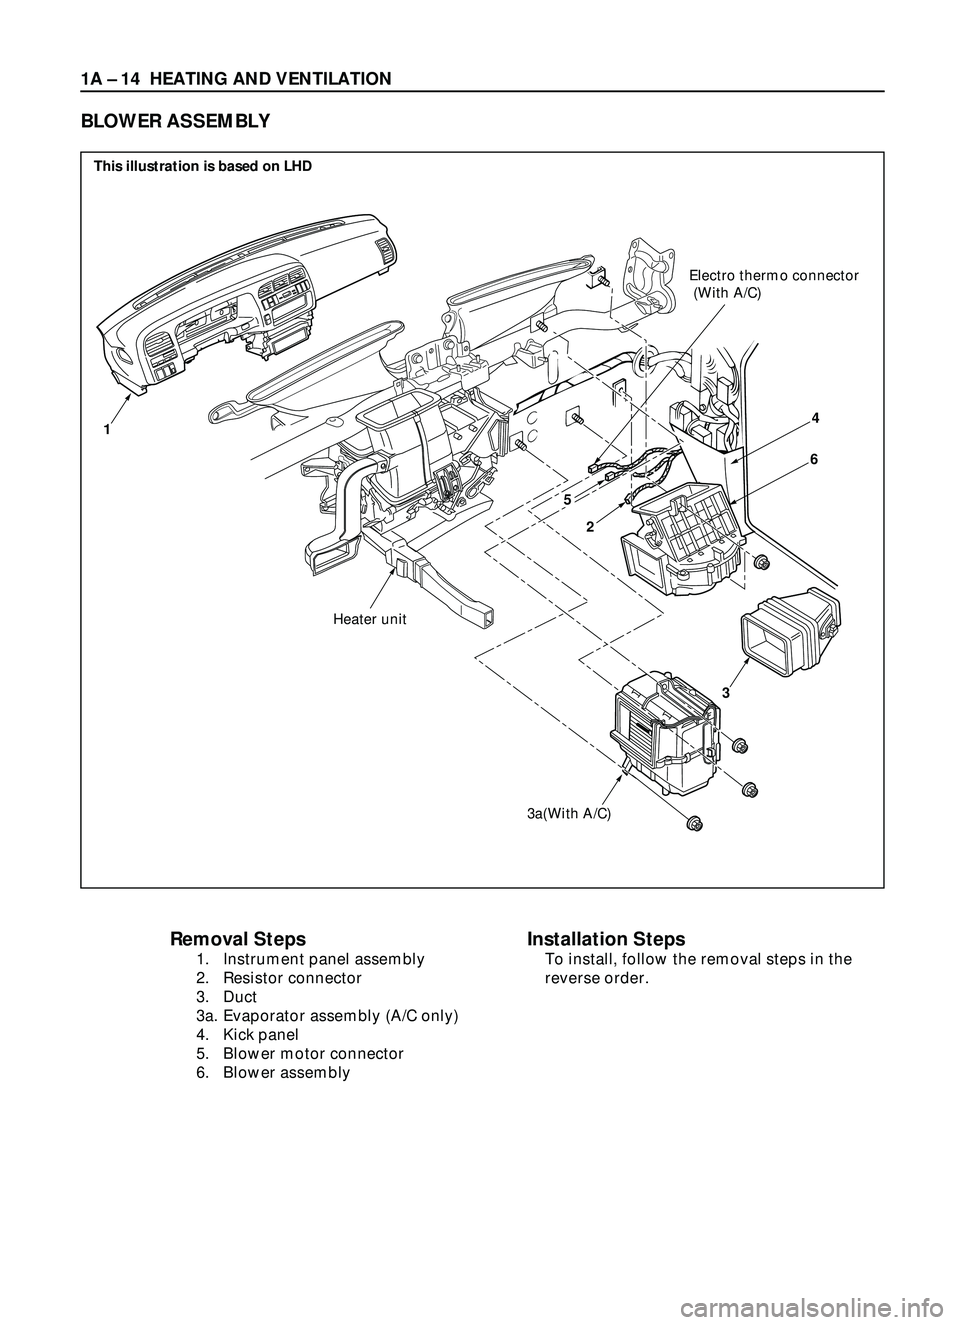 ISUZU TROOPER 1998  Service Repair Manual 1A Ð 14 HEATING AND VENTILATION
Removal Steps
1. Instrument panel assembly
2. Resistor connector
3. Duct
3a. Evaporator assembly (A/C only)
4. Kick panel
5. Blower motor connector
6. Blower assembly
